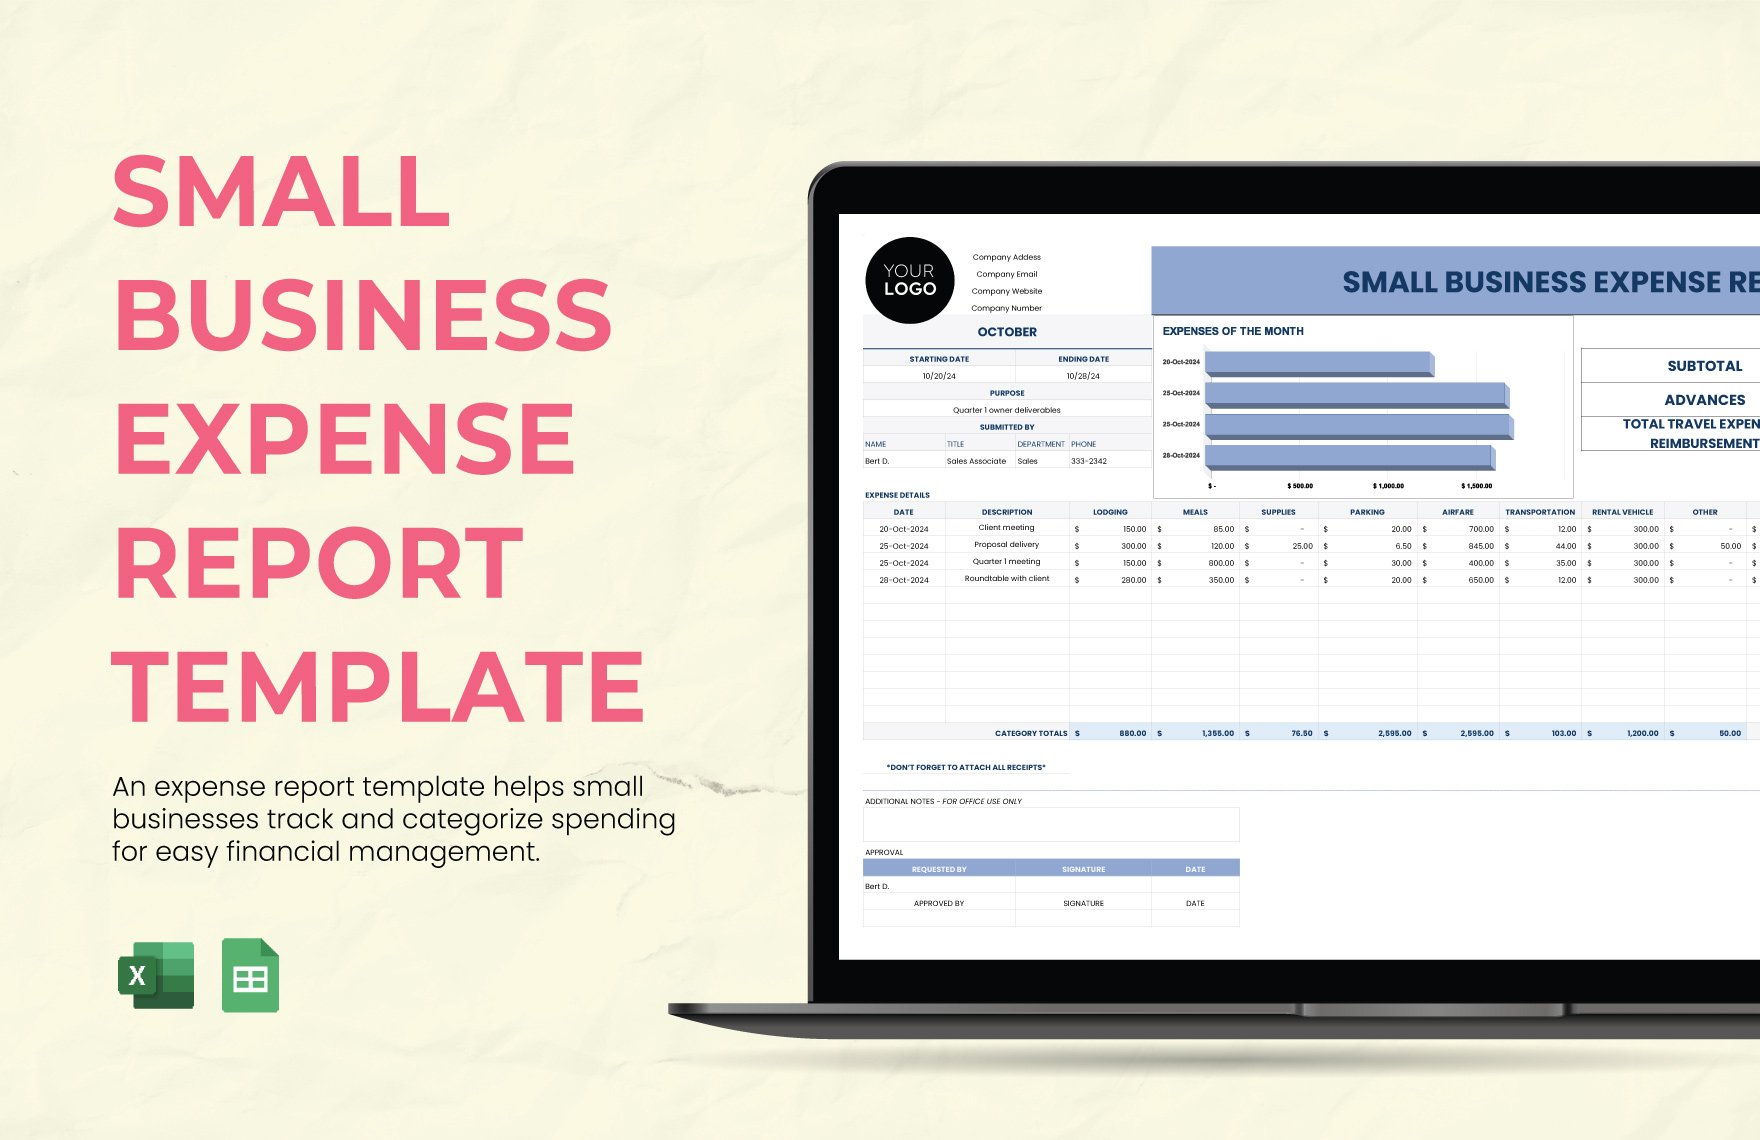 Small Business Expense Report Template